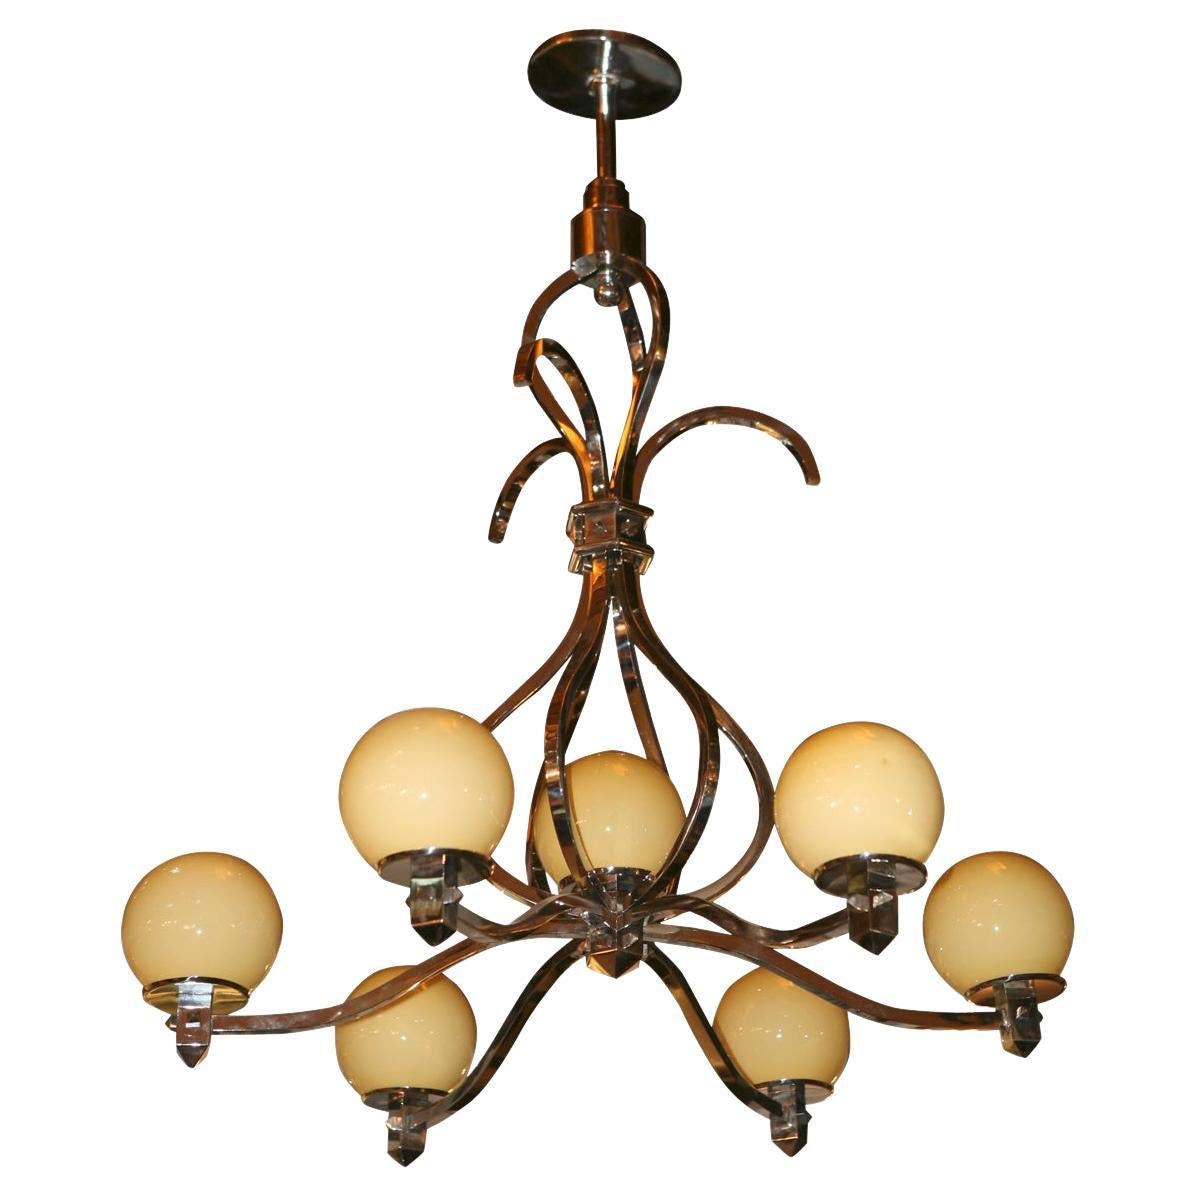 Chandelier Style: Art Deco , 1920, German, Materials: Chromed Bronze and Glass